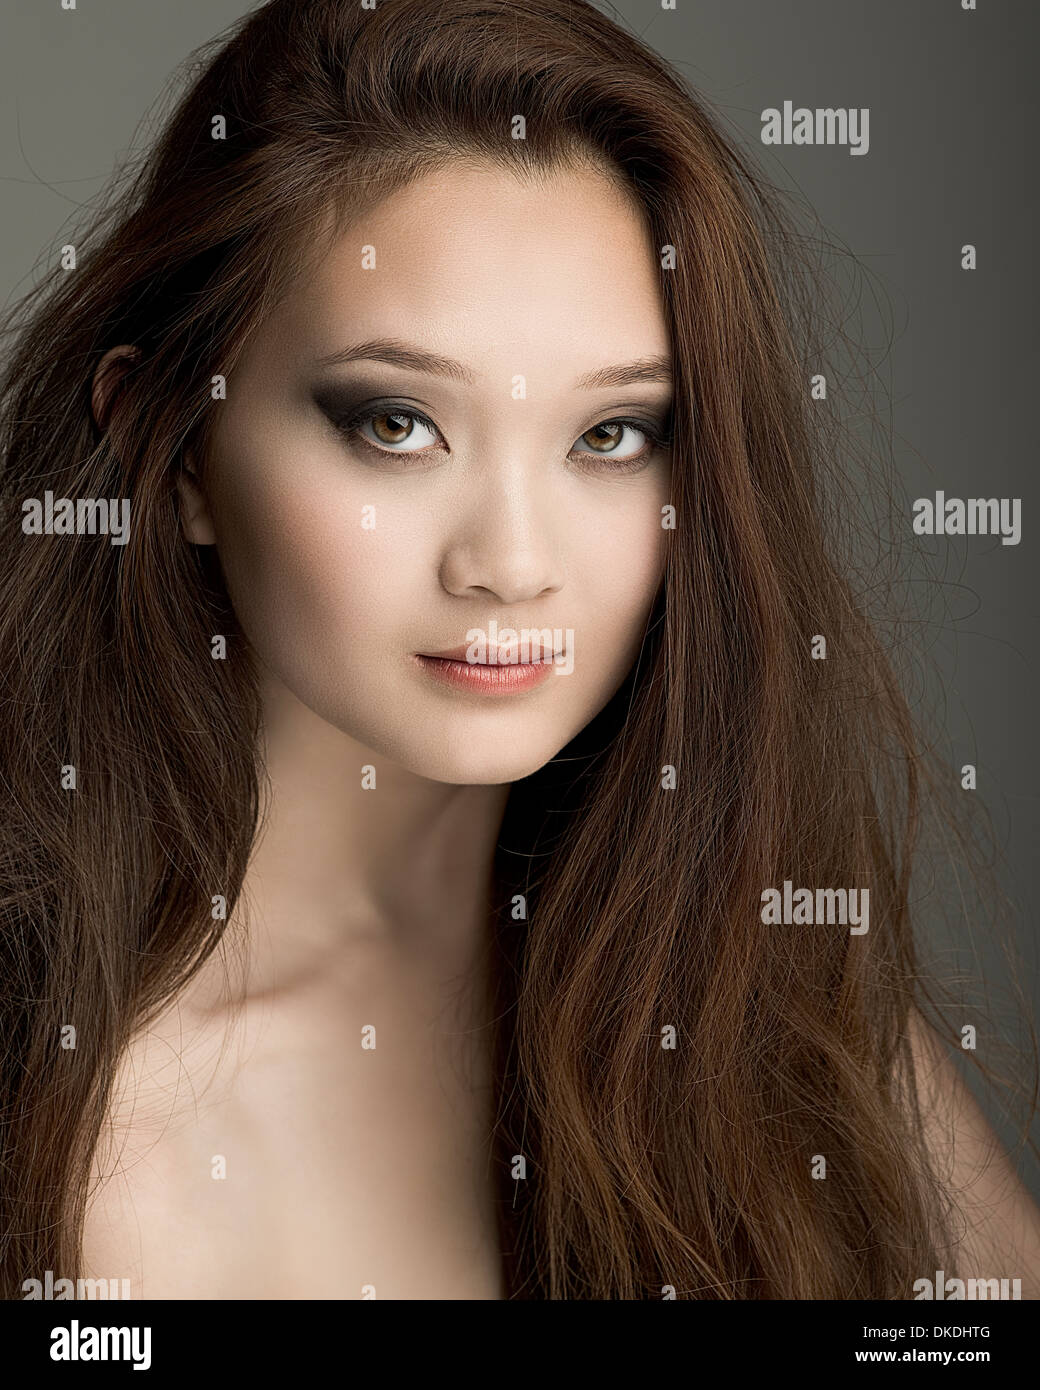 Beauty shot of a pretty young lady Asian Stock Photo